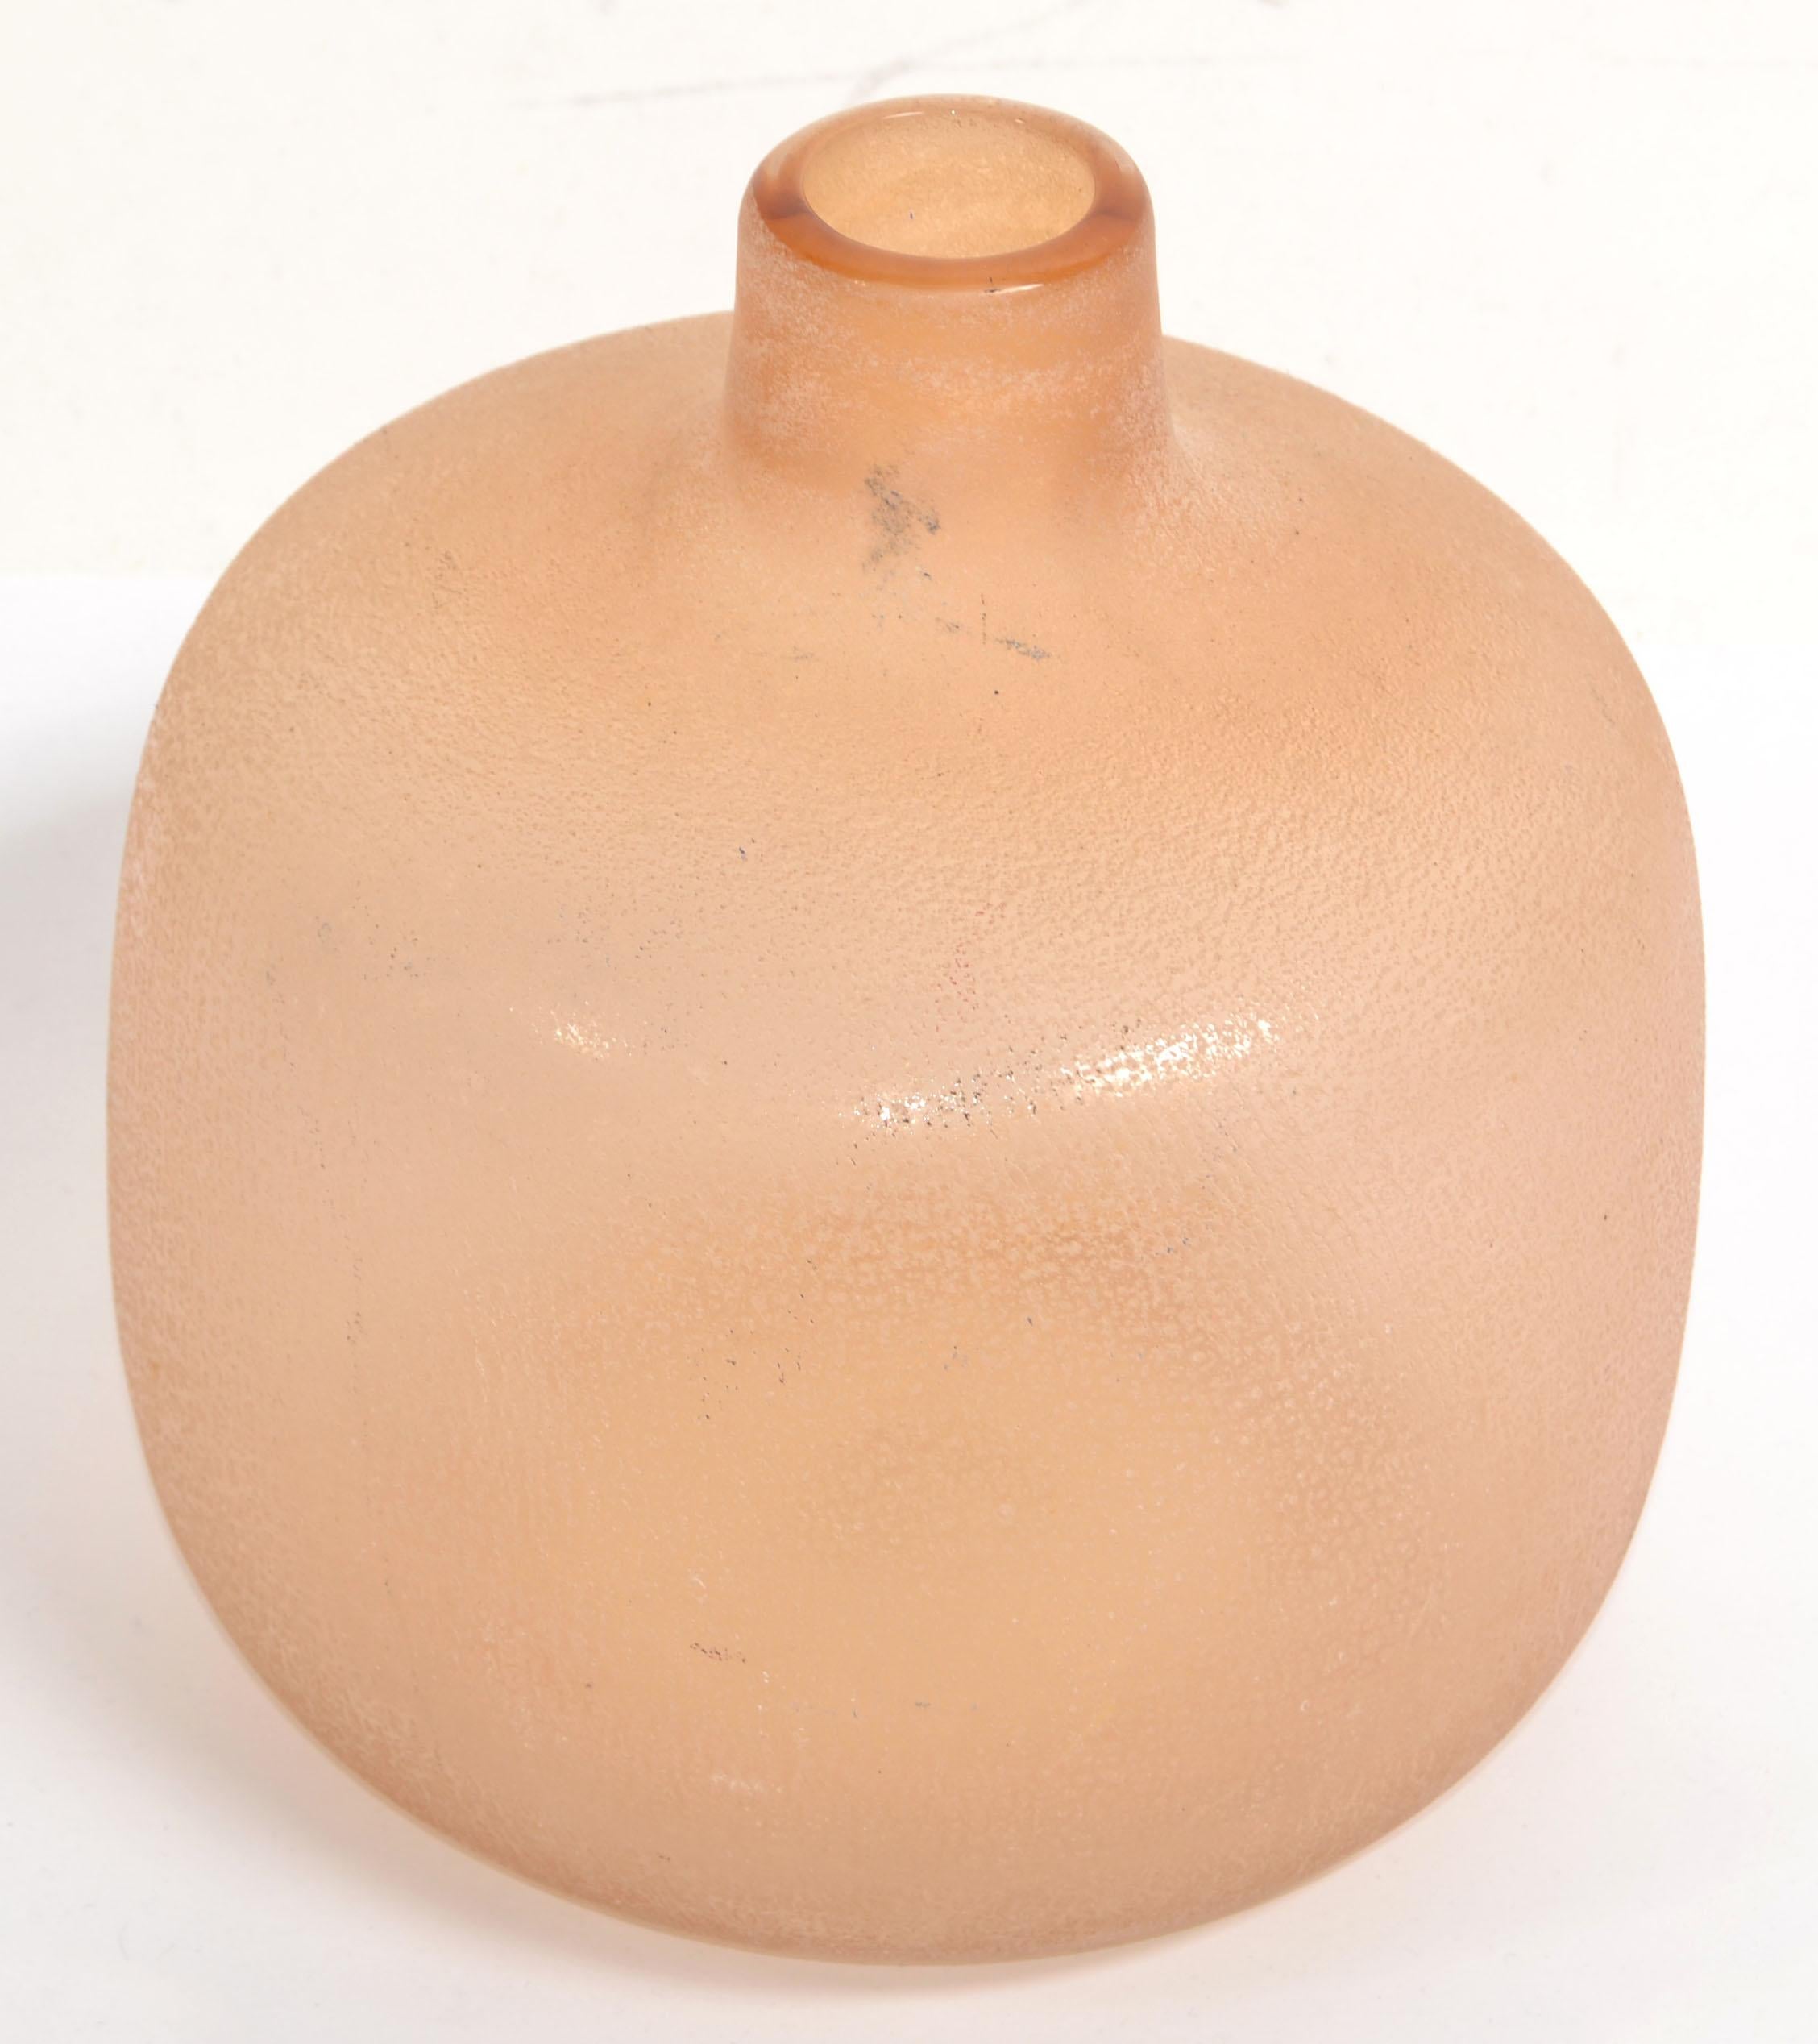 Archimede Seguso Italy Scavo Blown Murano Glass frosted peach color Glass vase, vessel, Centerpiece Mid-Century Modern made by Seguso Vetri d'Arte Italy circa in late 1950s.
This stunning Murano vase is a true work of art, crafted by hand using